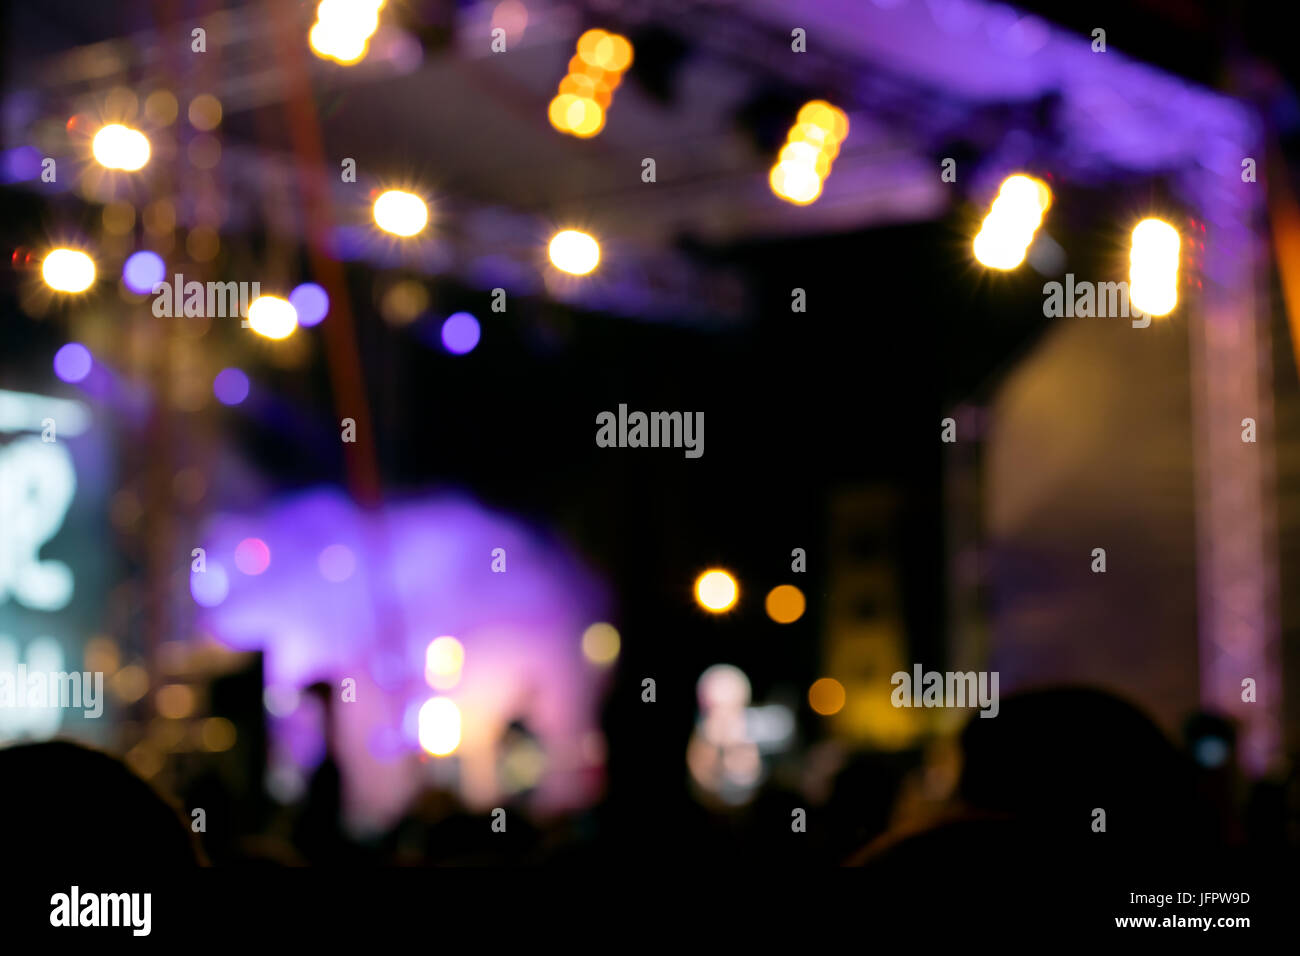 blurred lights of outdoor stage. silhouette of crowd at music concert. Stock Photo